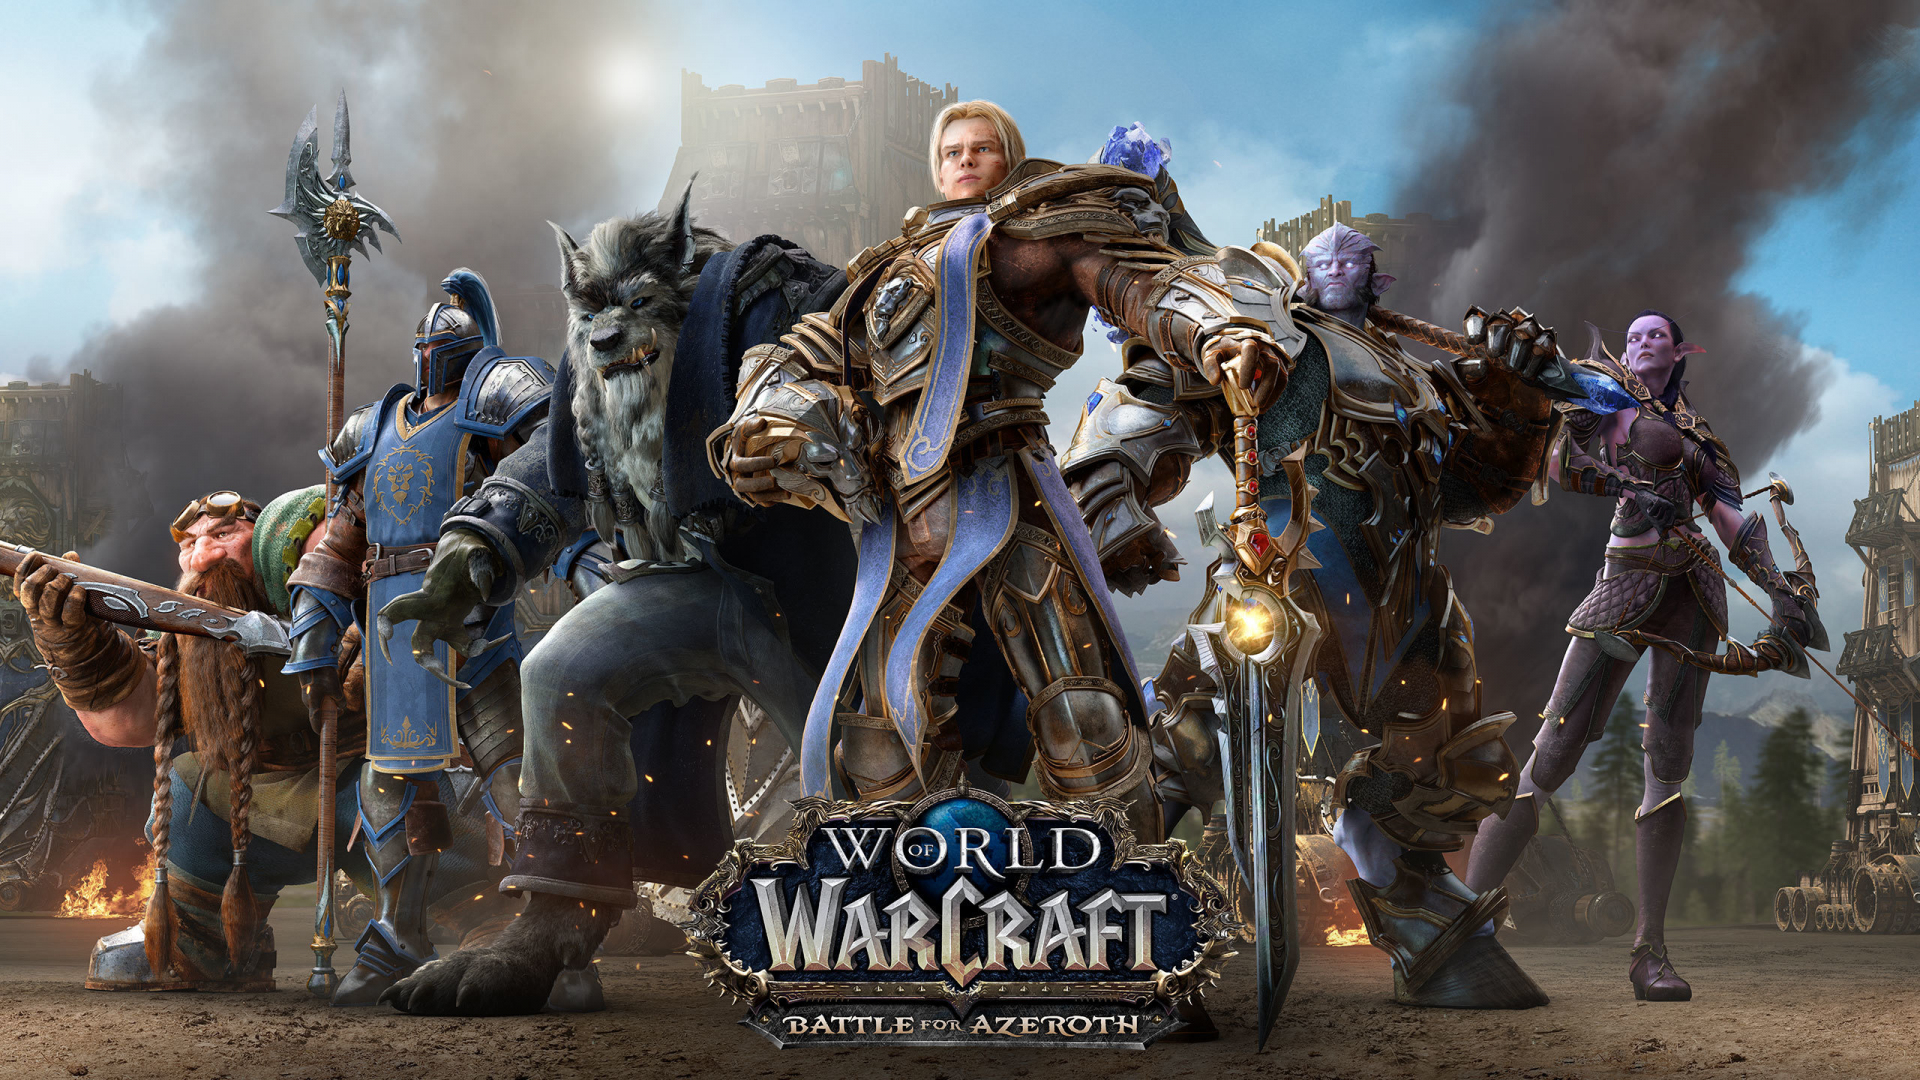 Download wallpaper 1920x1080 world of warcraft: battle for azeroth, video  game, warriors, full hd, hdtv, fhd, 1080p wallpaper, 1920x1080 hd background,  2984